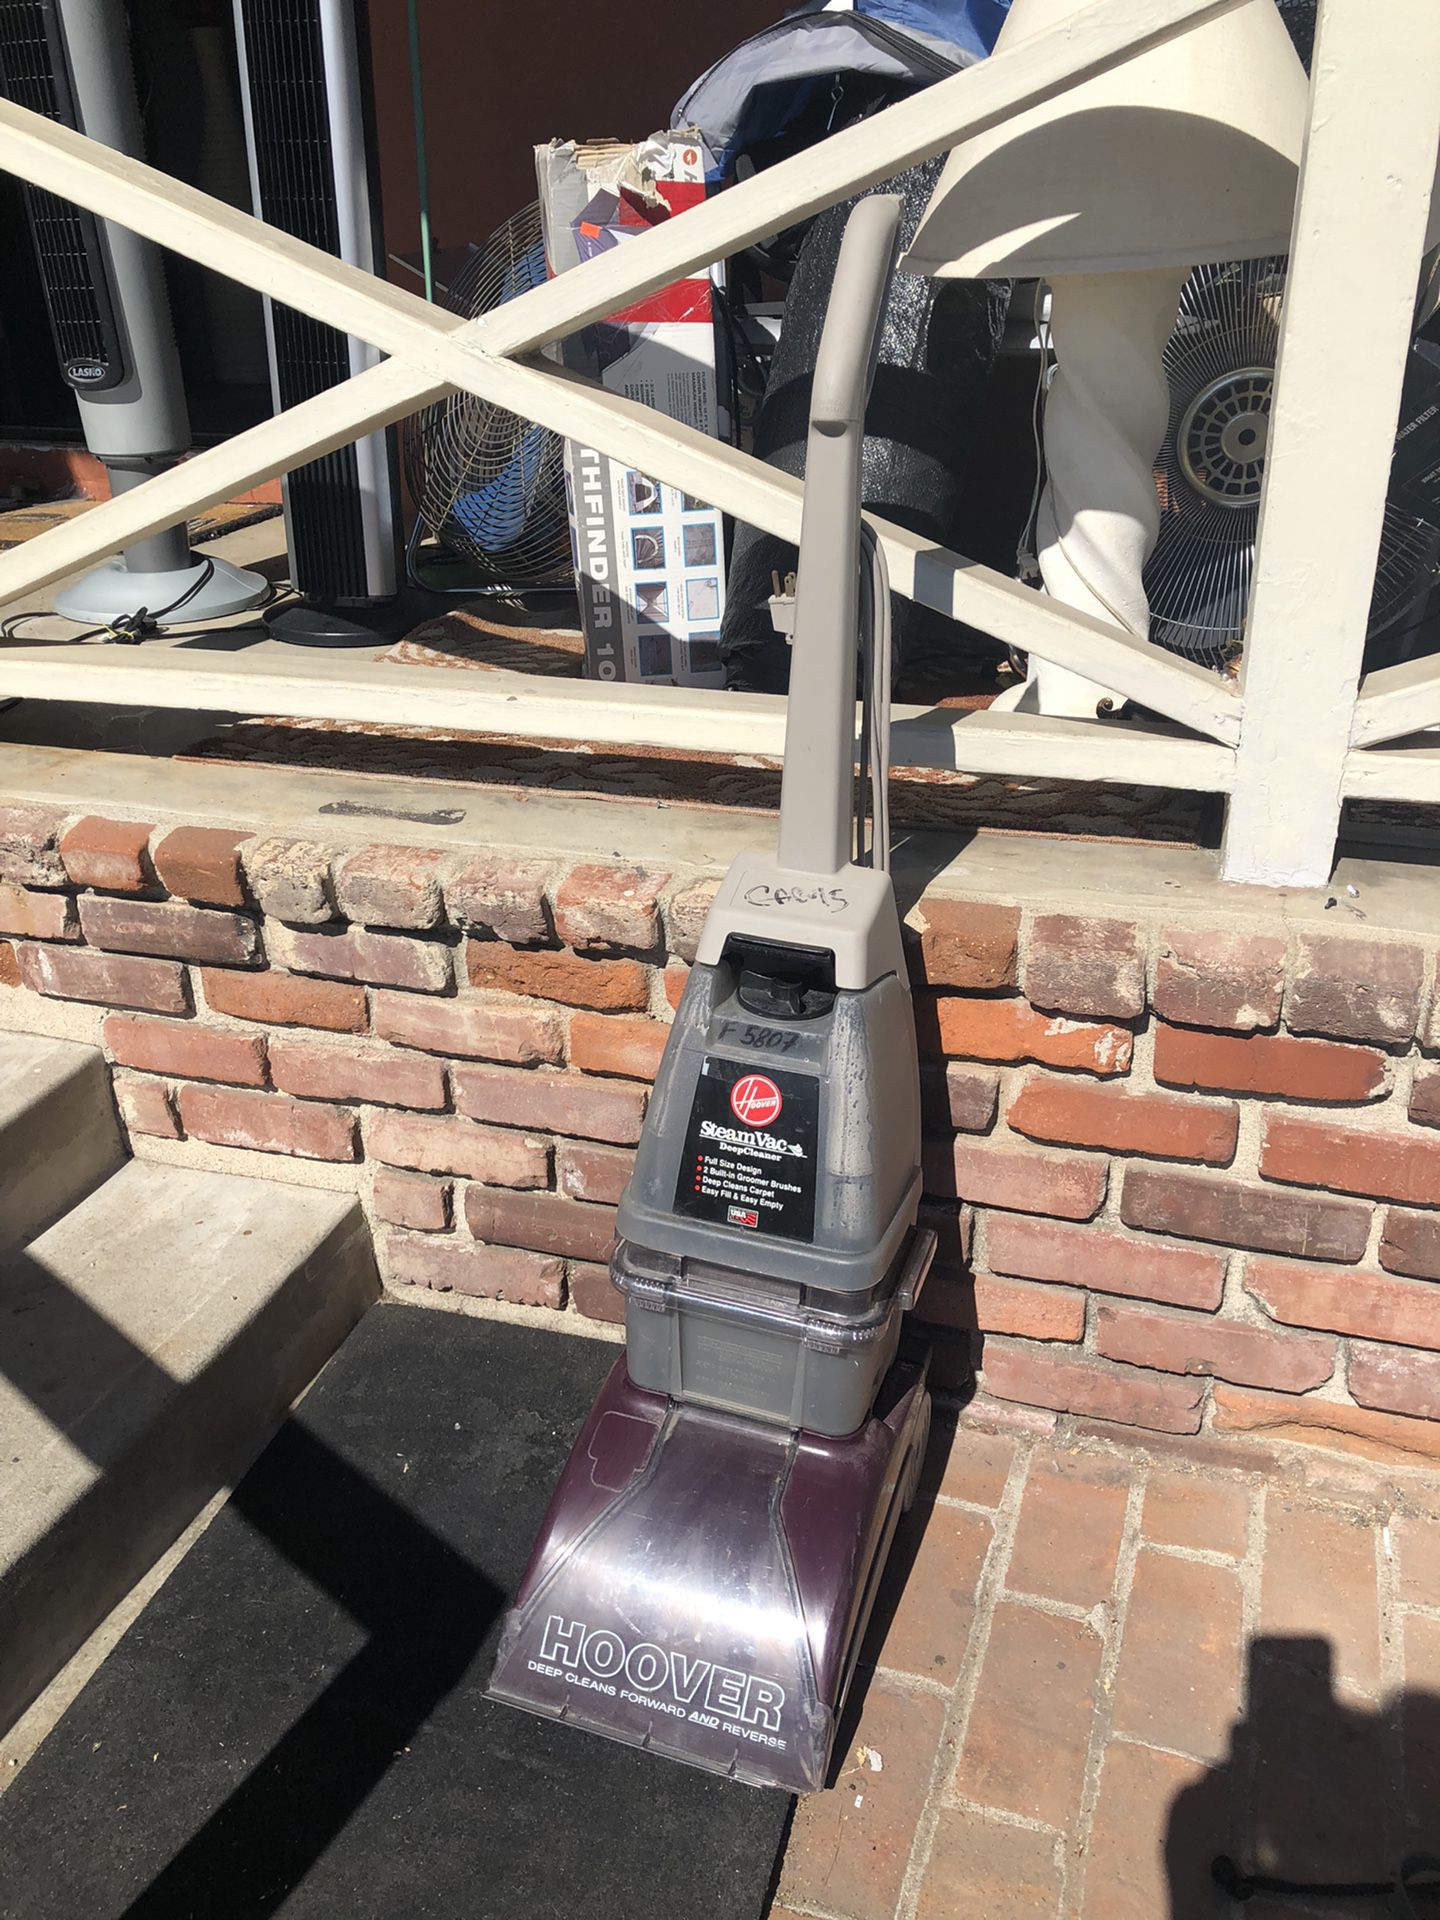 Hoover Steam Vac Carpet cleaner in working condition